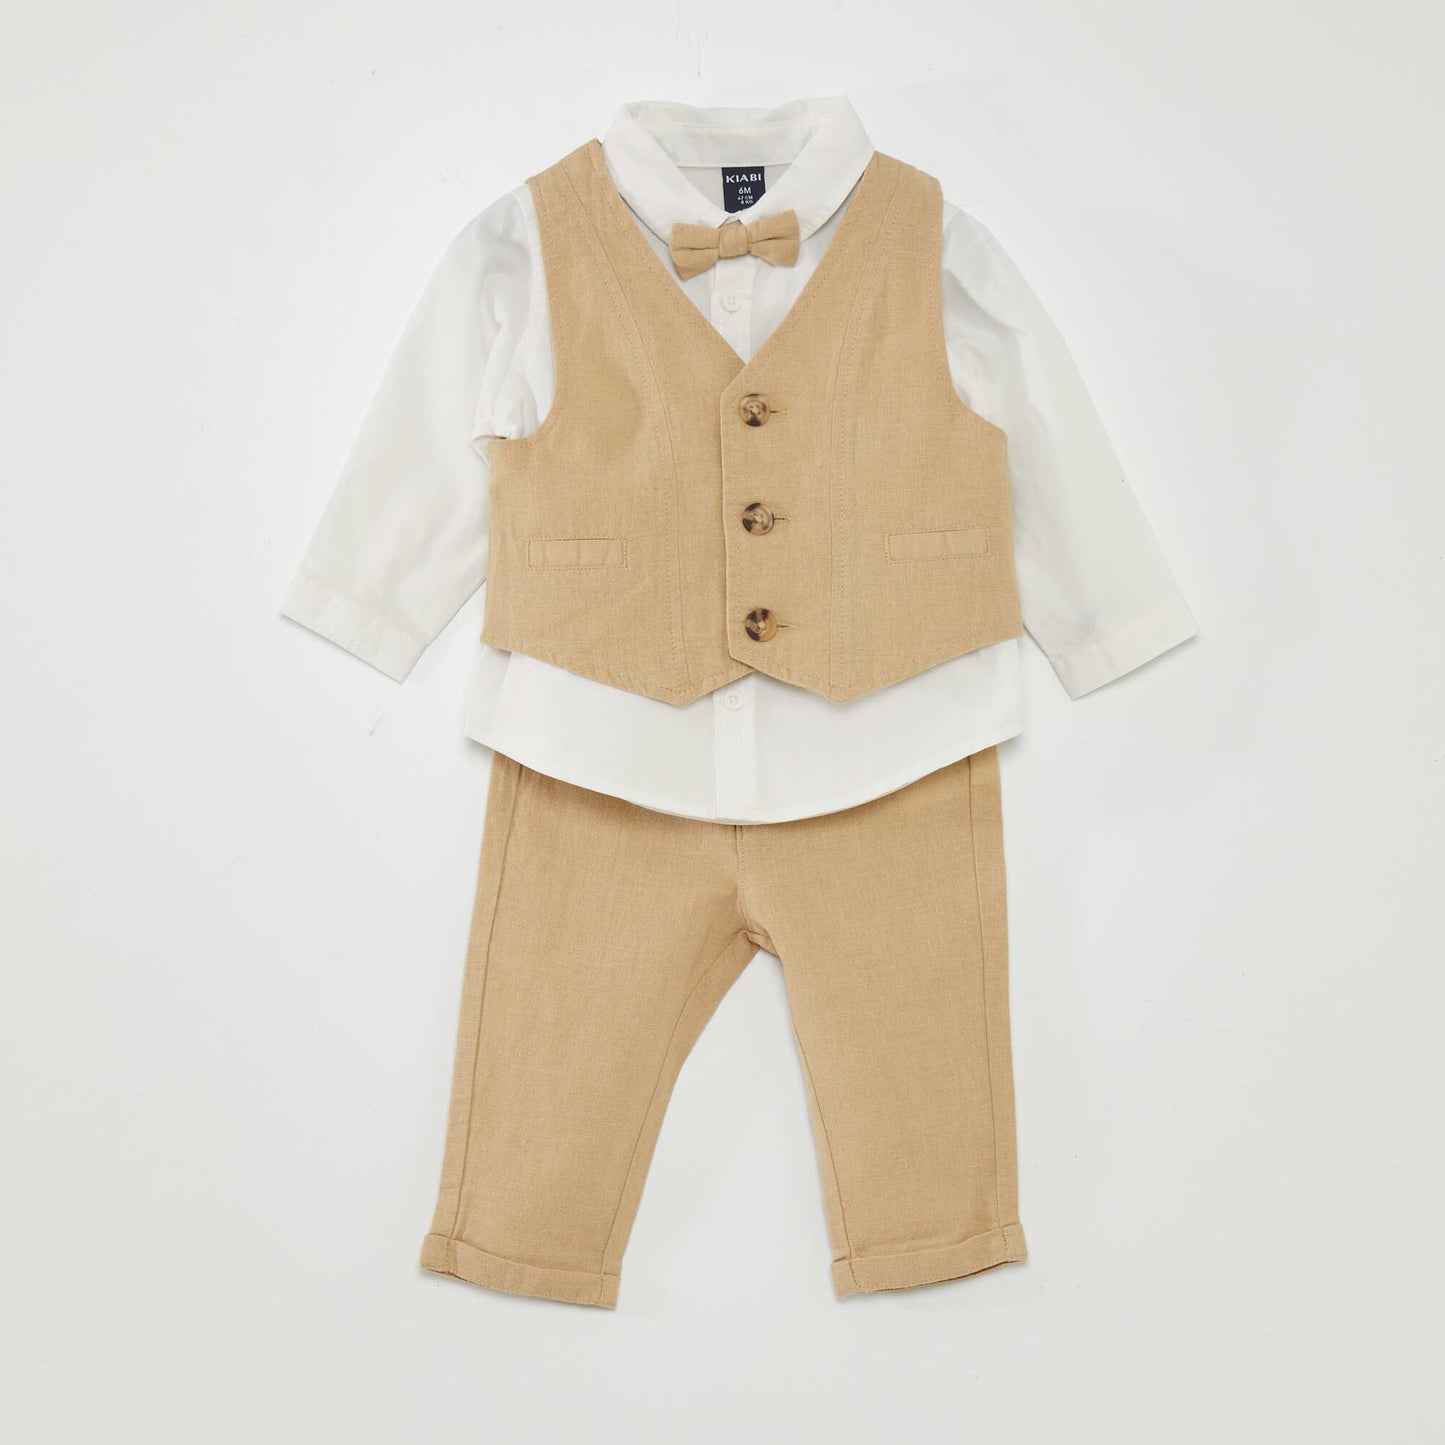 Shirt  trousers  waistcoat and bow tie set  - 3-piece set BEIGE